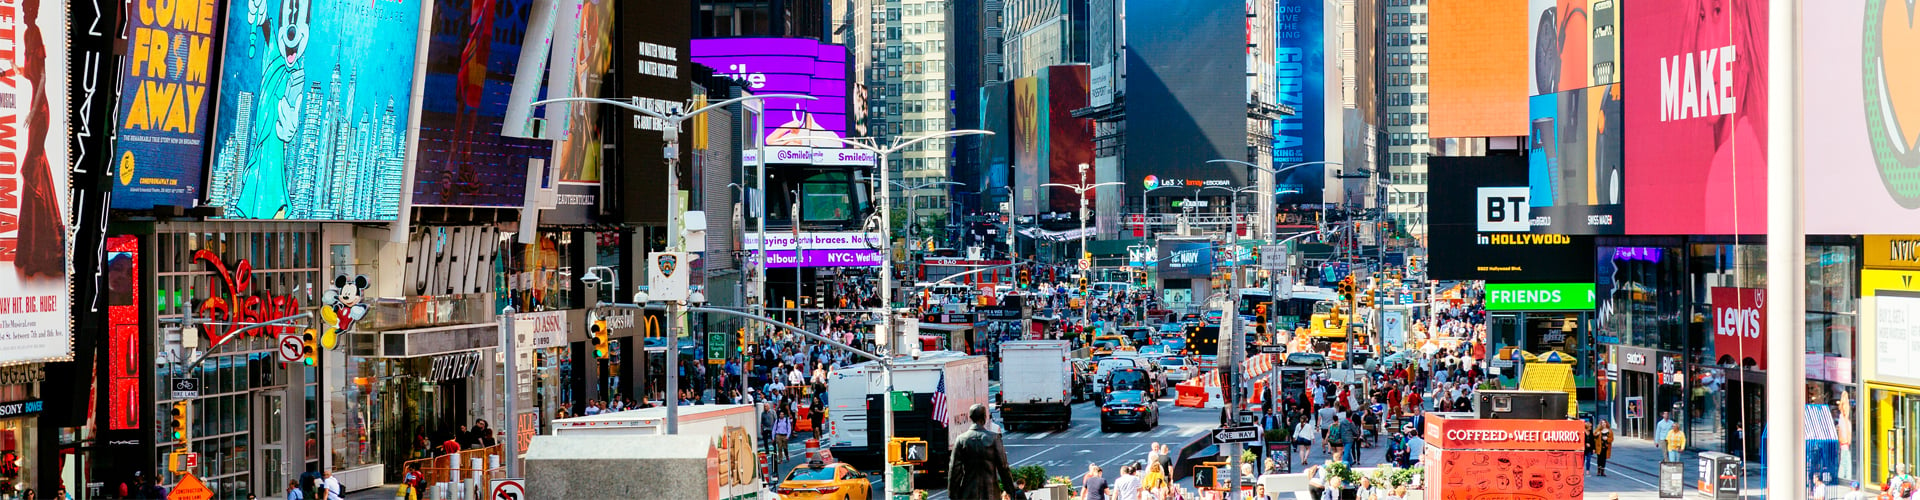 Traffic and advertising signs in Times Square, New York